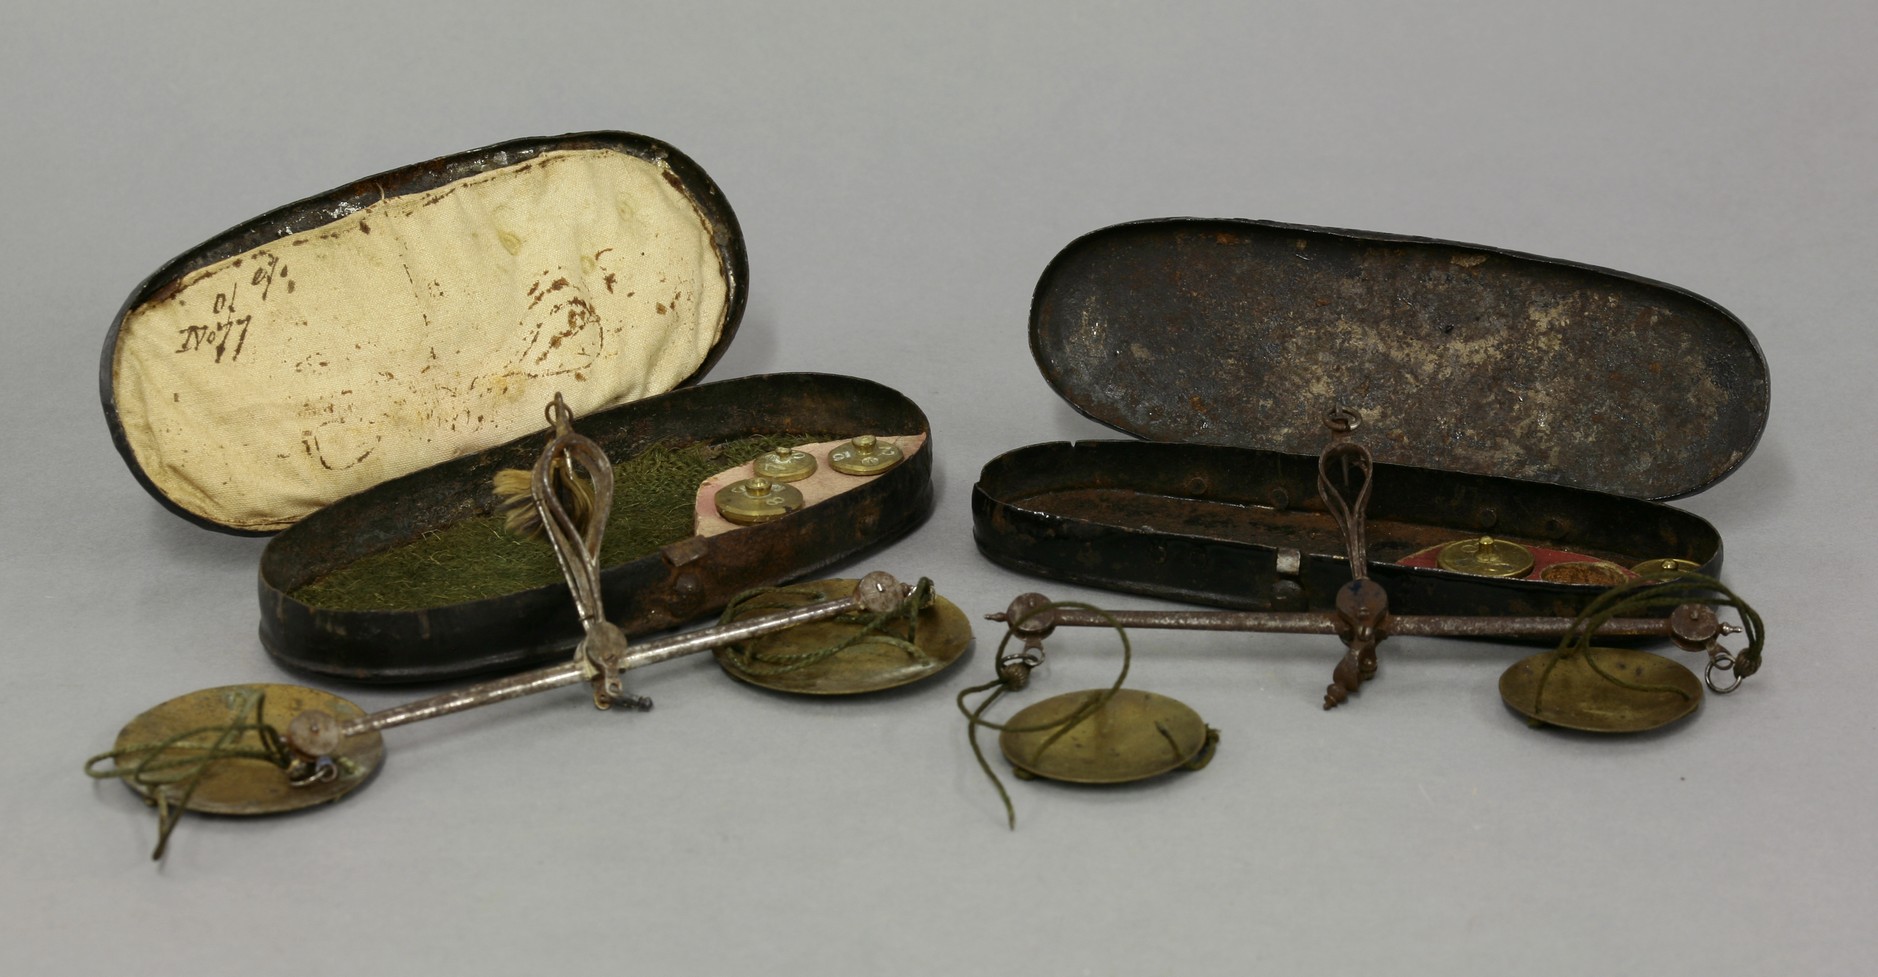 Two George III steel and brass coin scales, circa 1770, each beam with box ends, one housing three